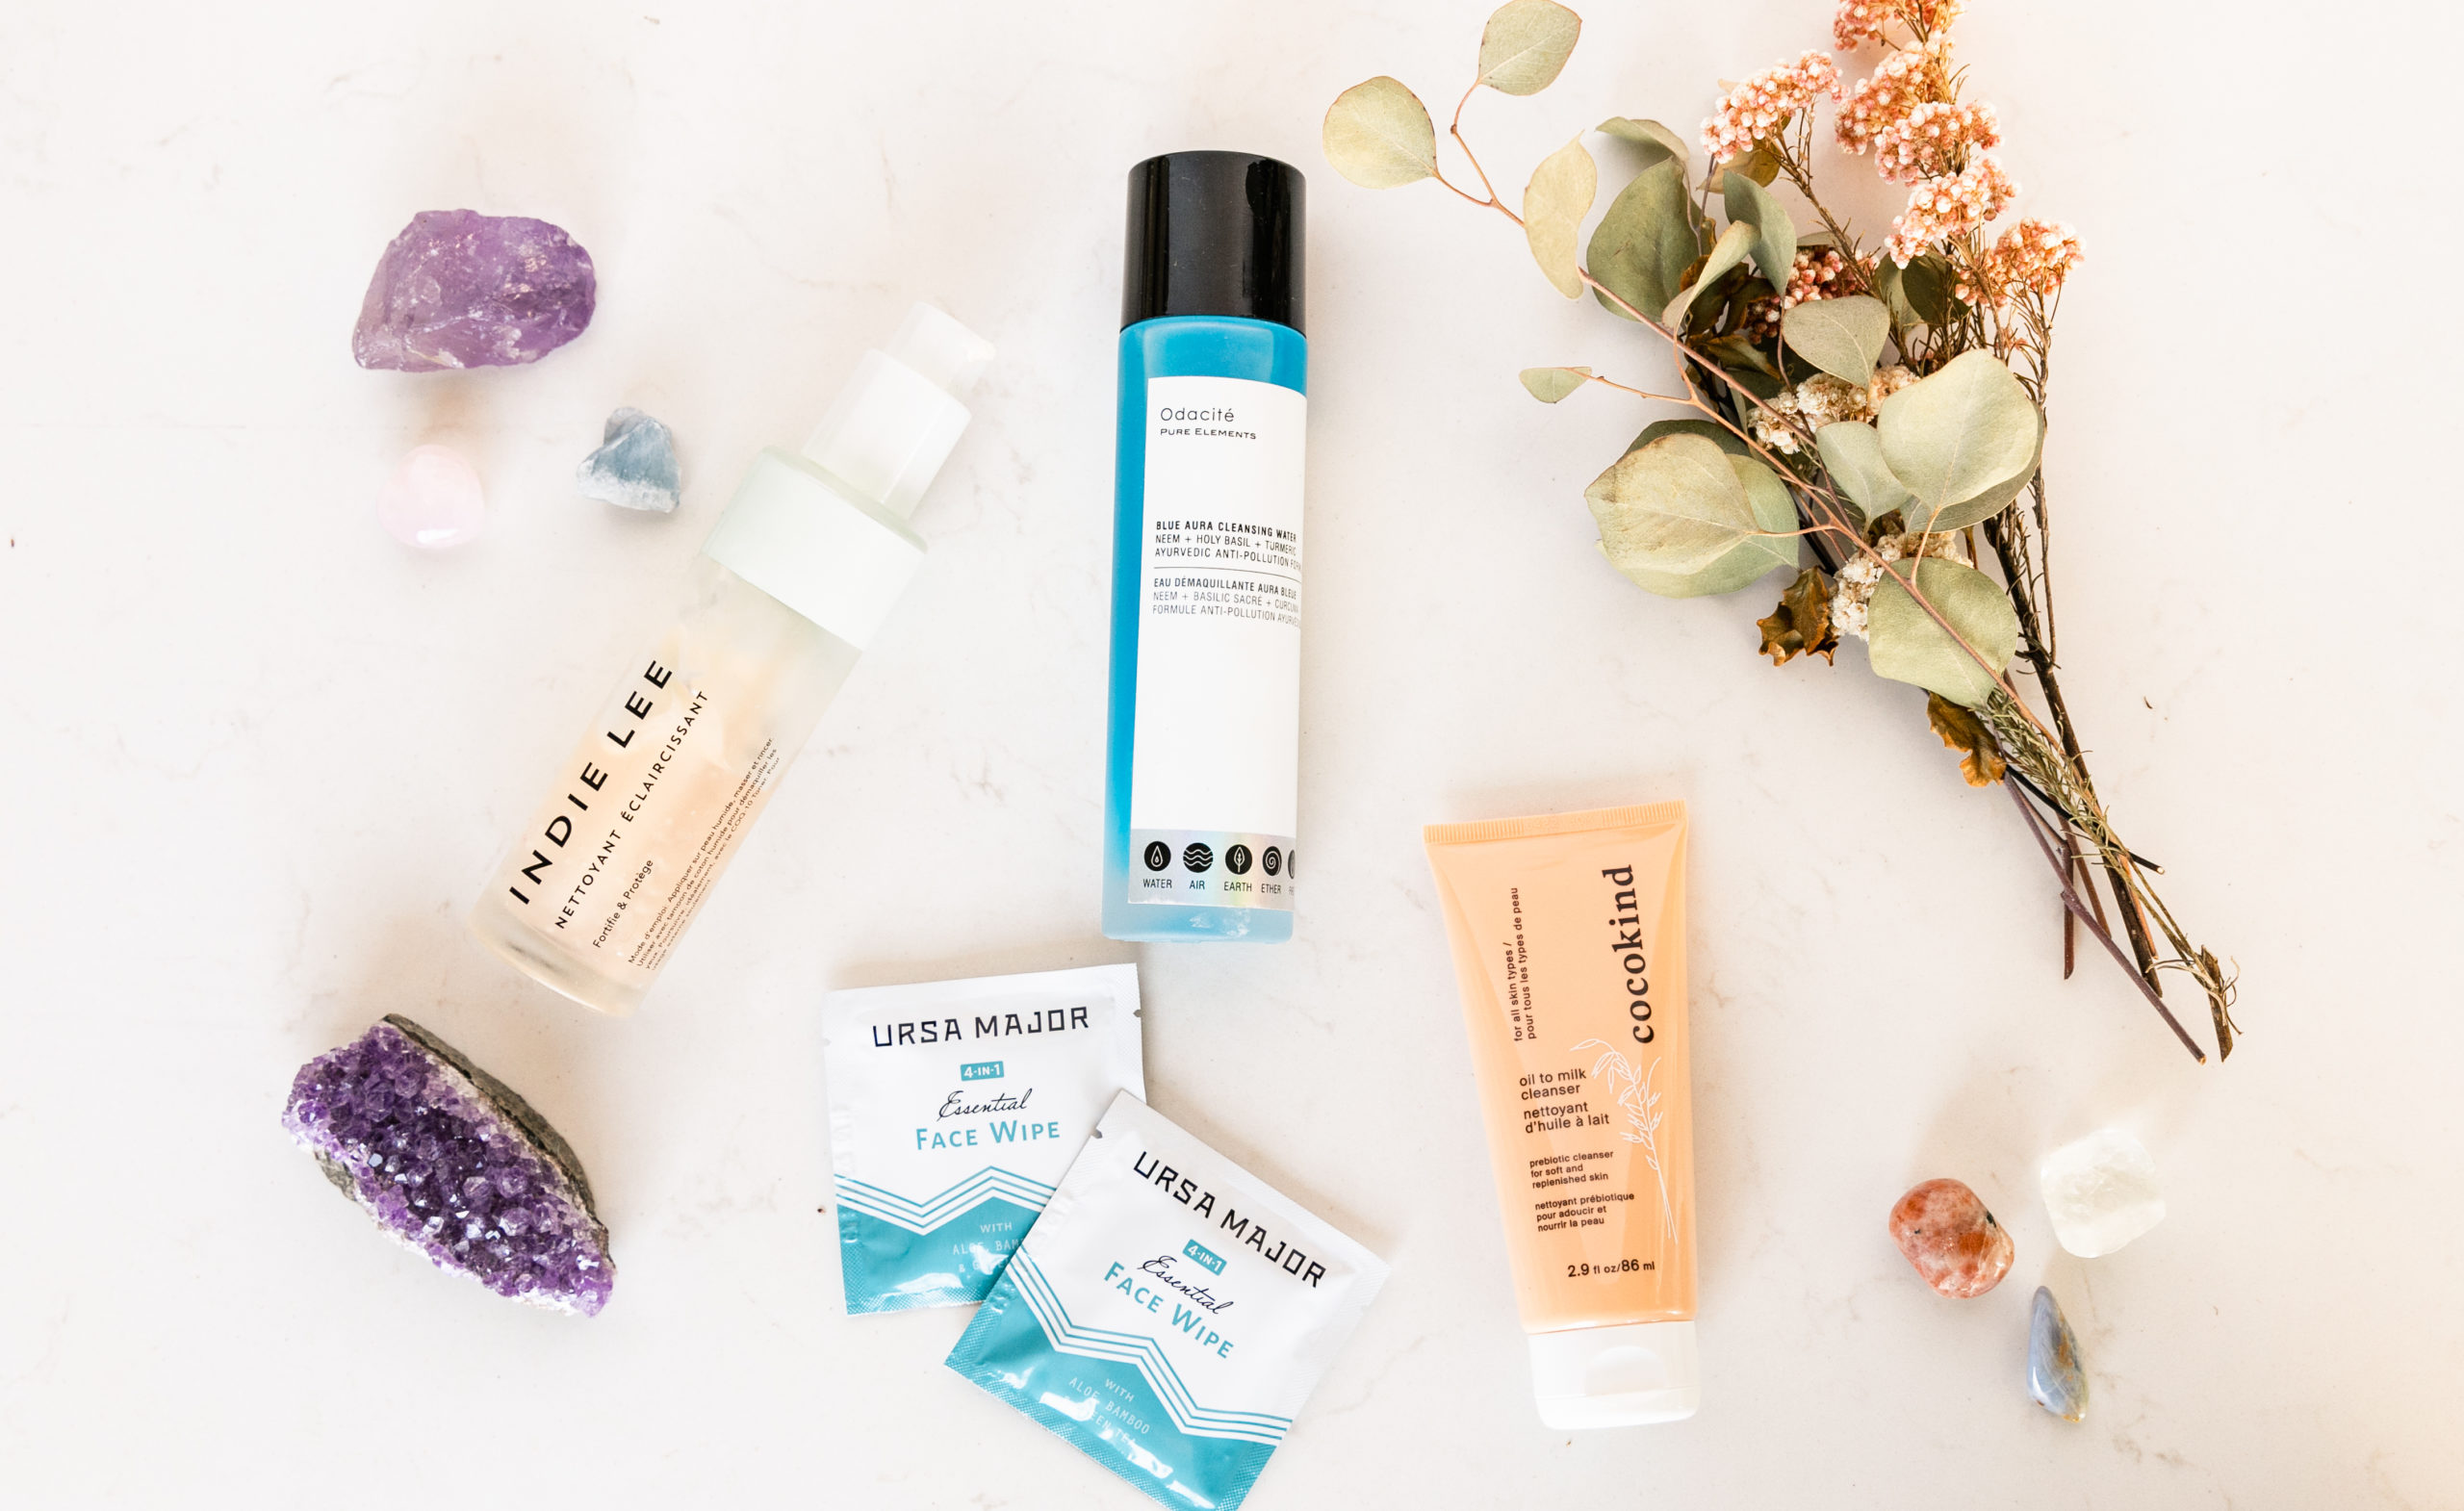 The top natural, nontoxic, clean face cleansers. If you start anywhere with beauty, start with a clean face! #naturalskincare #cleanbeauty #cleanskincare #holisticwellness #TheDimpleLife